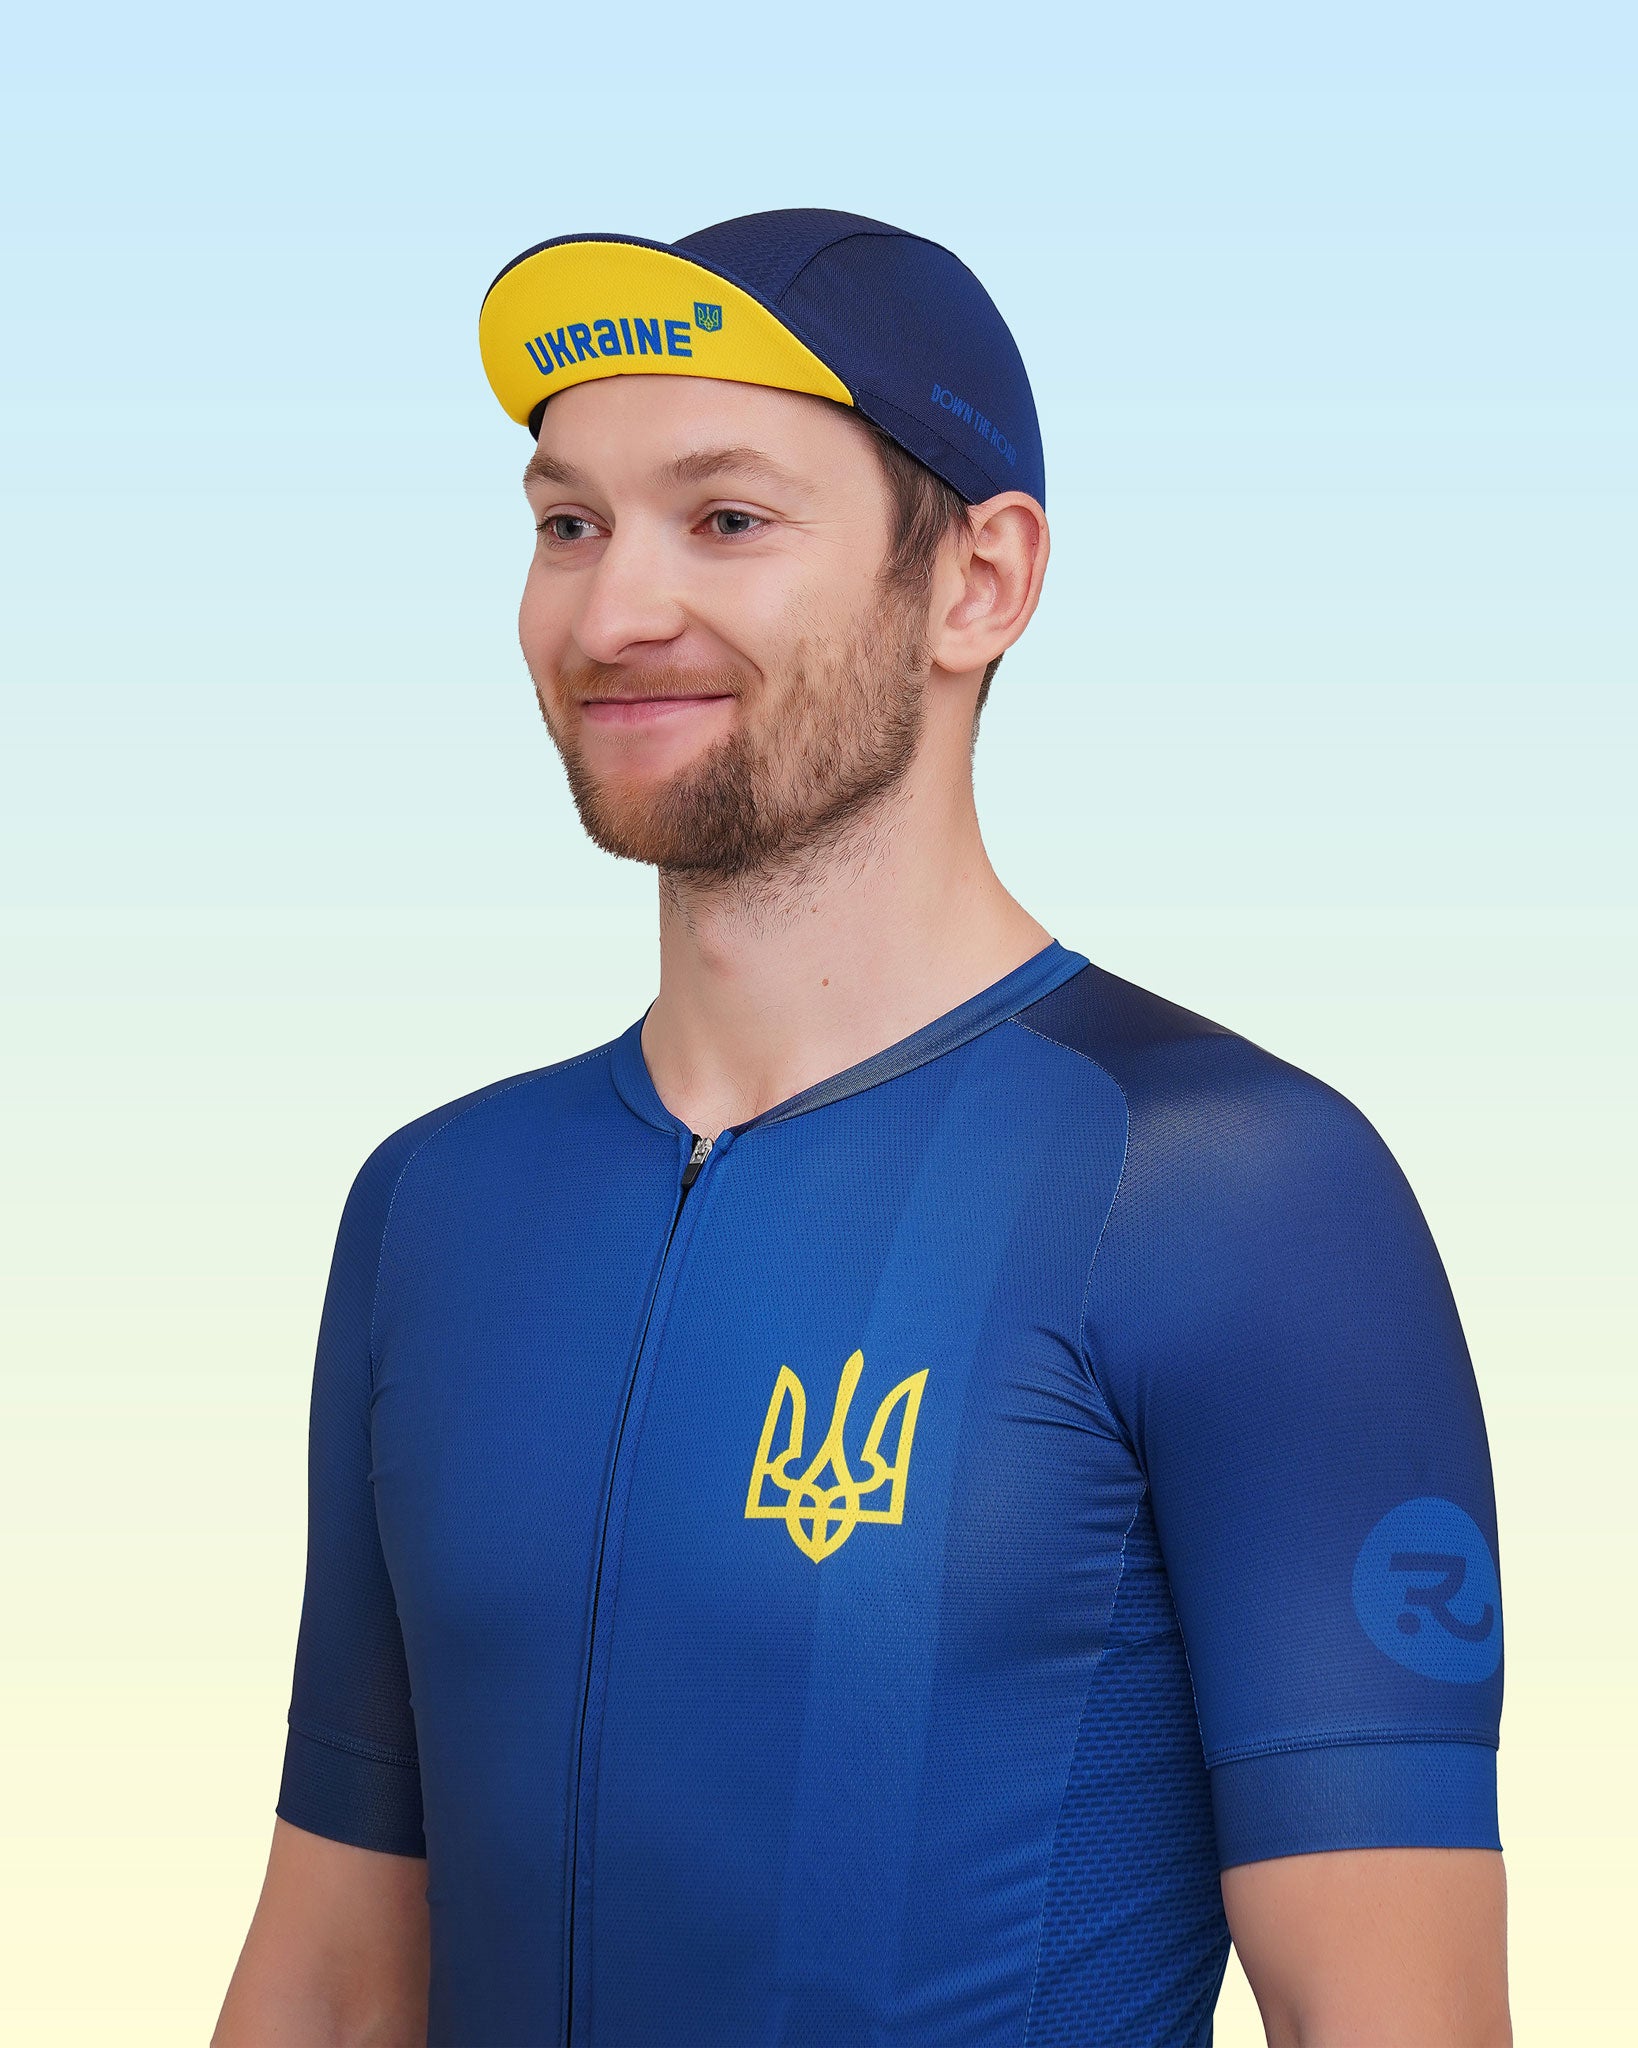 man wearing ukraine cycling clothes